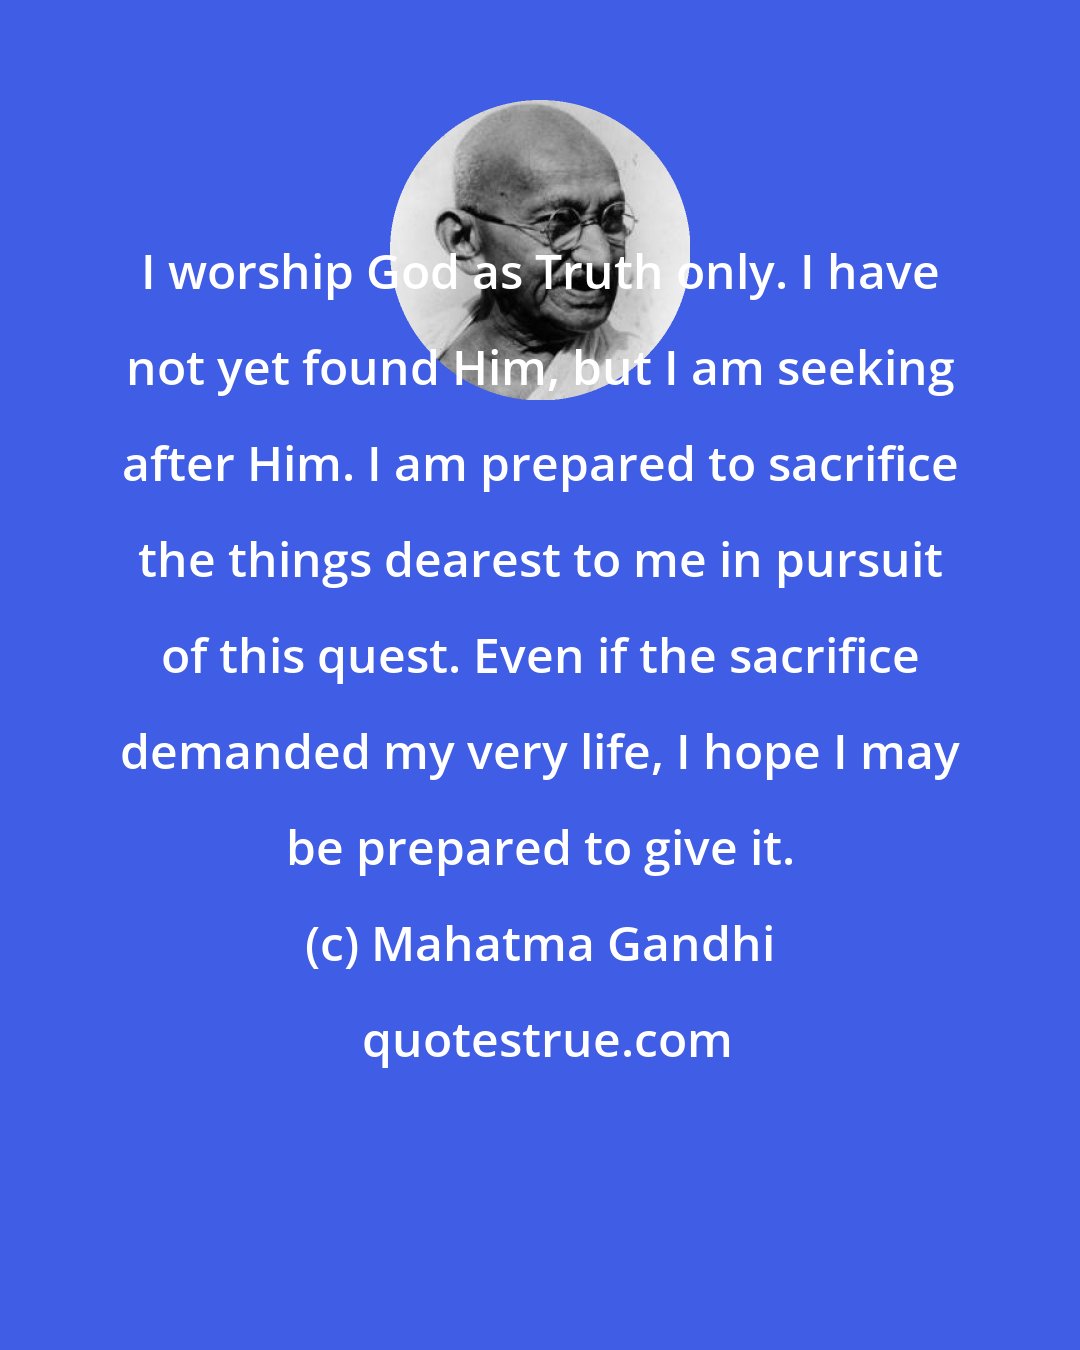 Mahatma Gandhi: I worship God as Truth only. I have not yet found Him, but I am seeking after Him. I am prepared to sacrifice the things dearest to me in pursuit of this quest. Even if the sacrifice demanded my very life, I hope I may be prepared to give it.